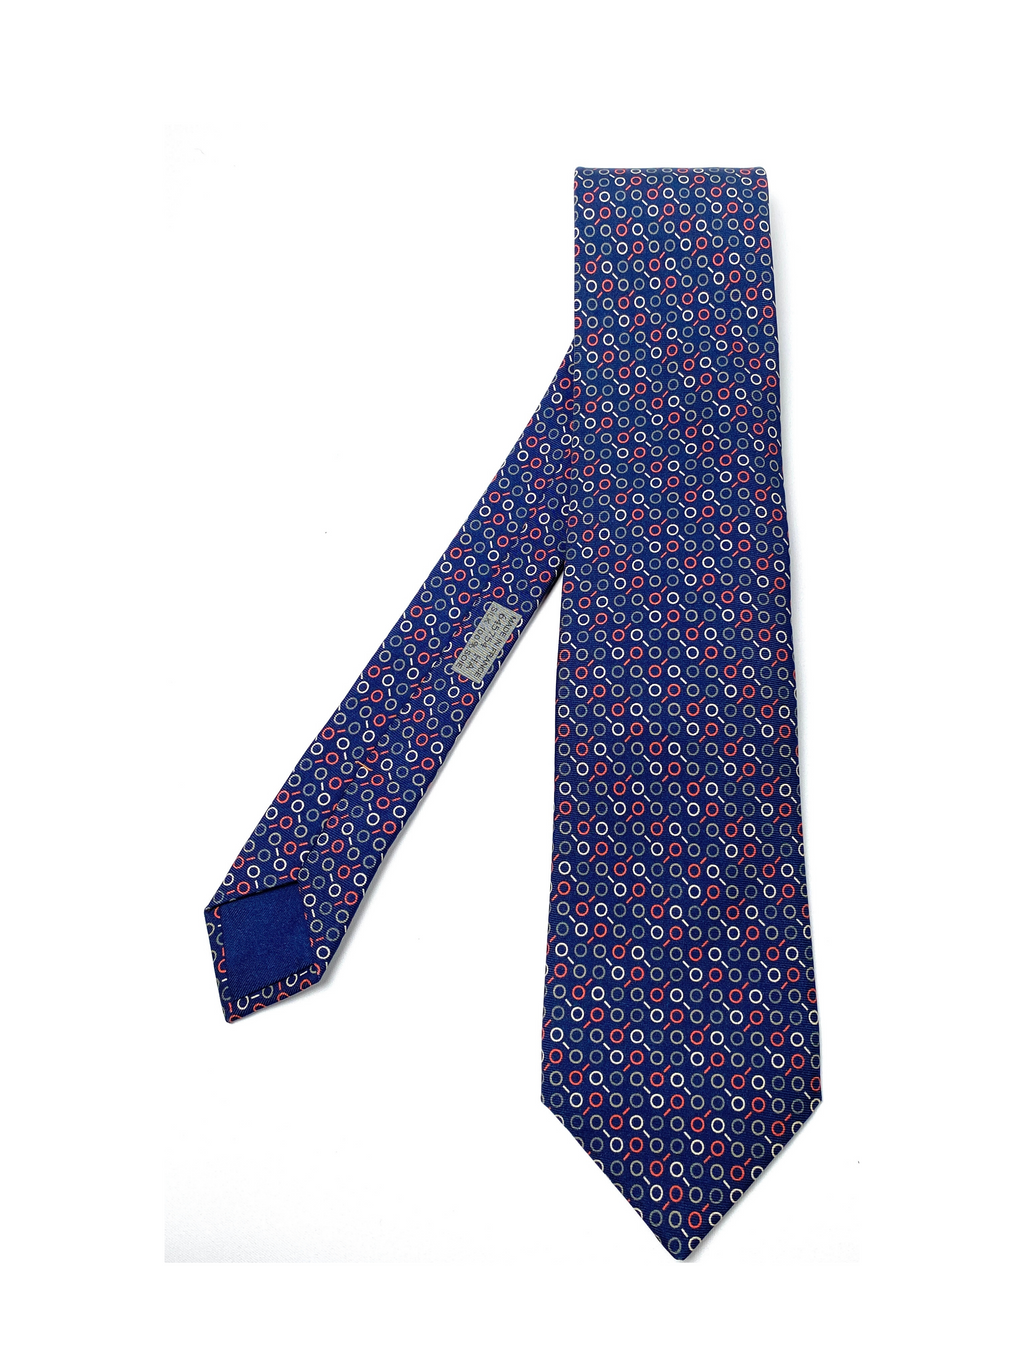 HERMES - NAVY BLUE "THE SEARCH" HEAVY SILK TWILL NECK TIE